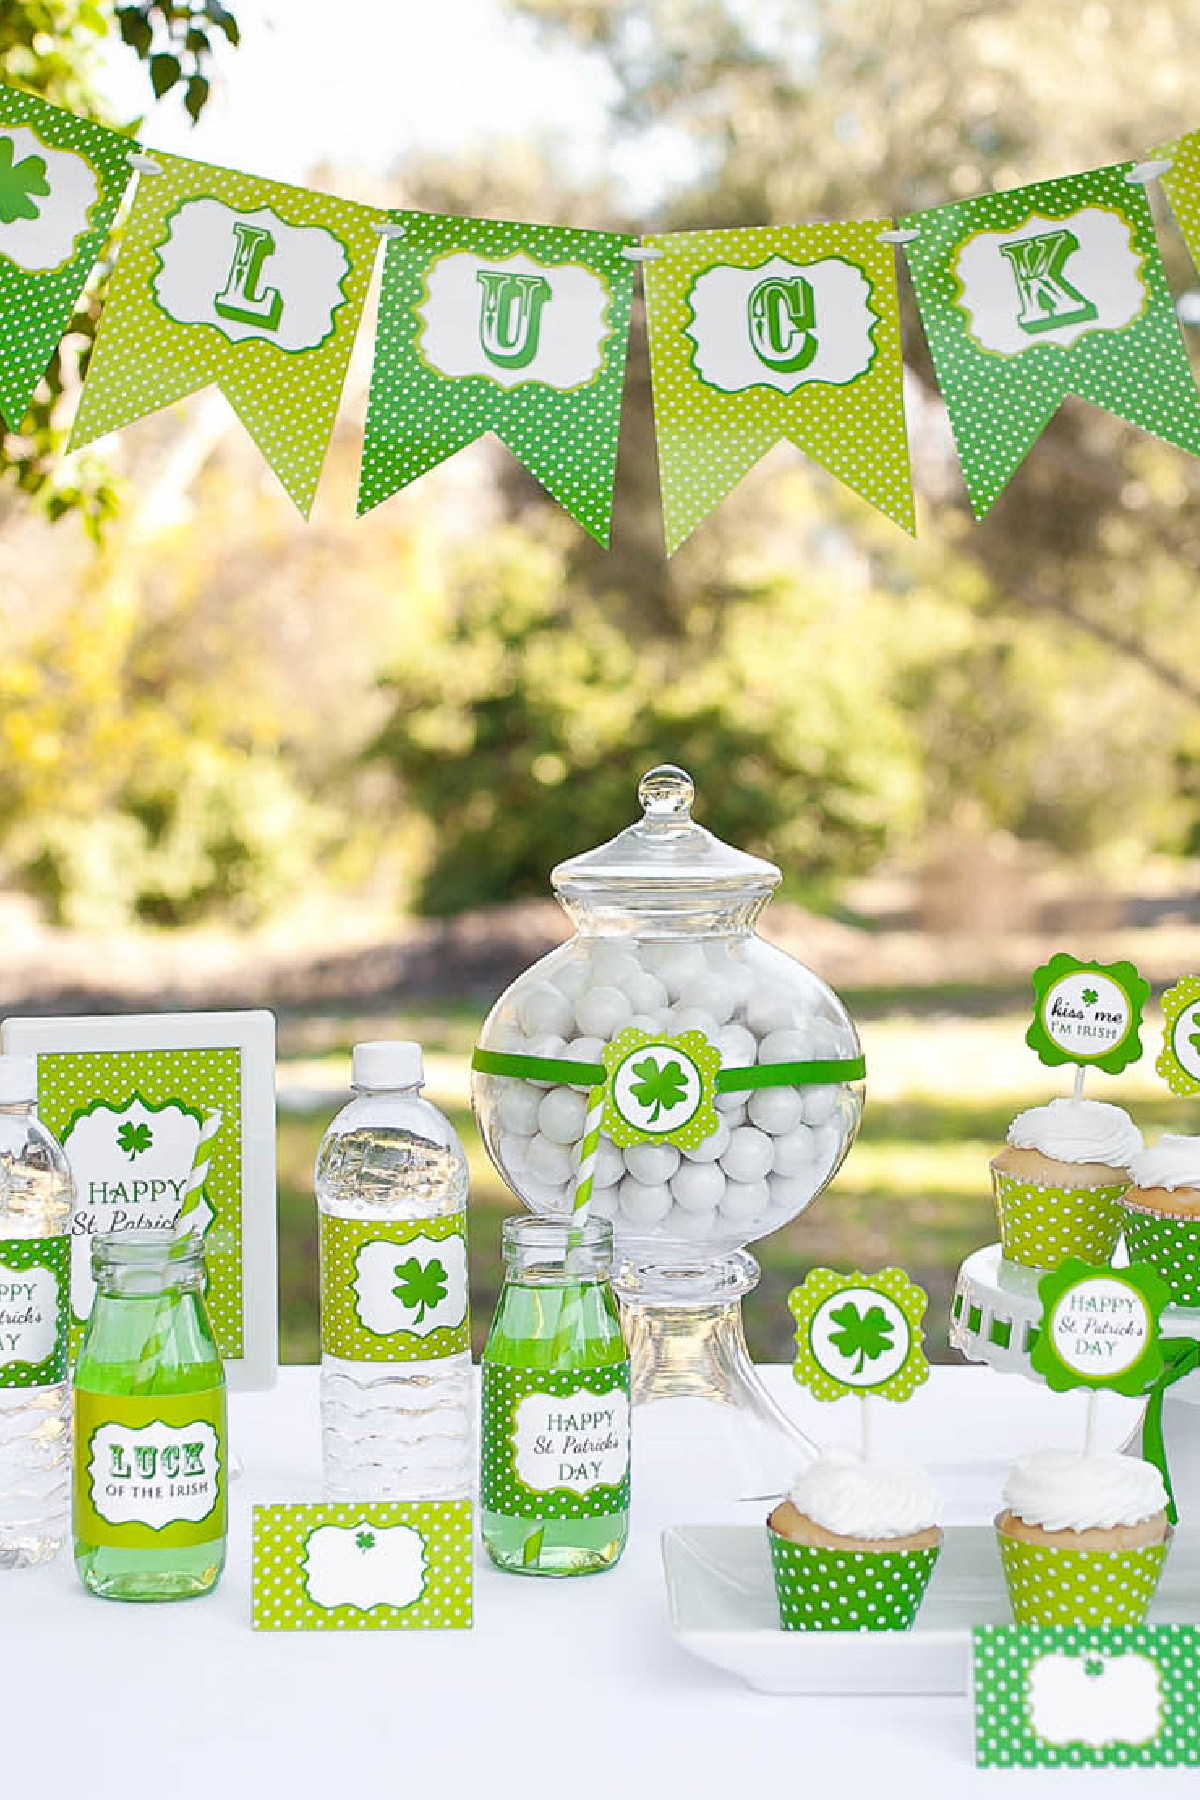 FREE “Luck of the Irish” St. Patrick’s Day Party Printables